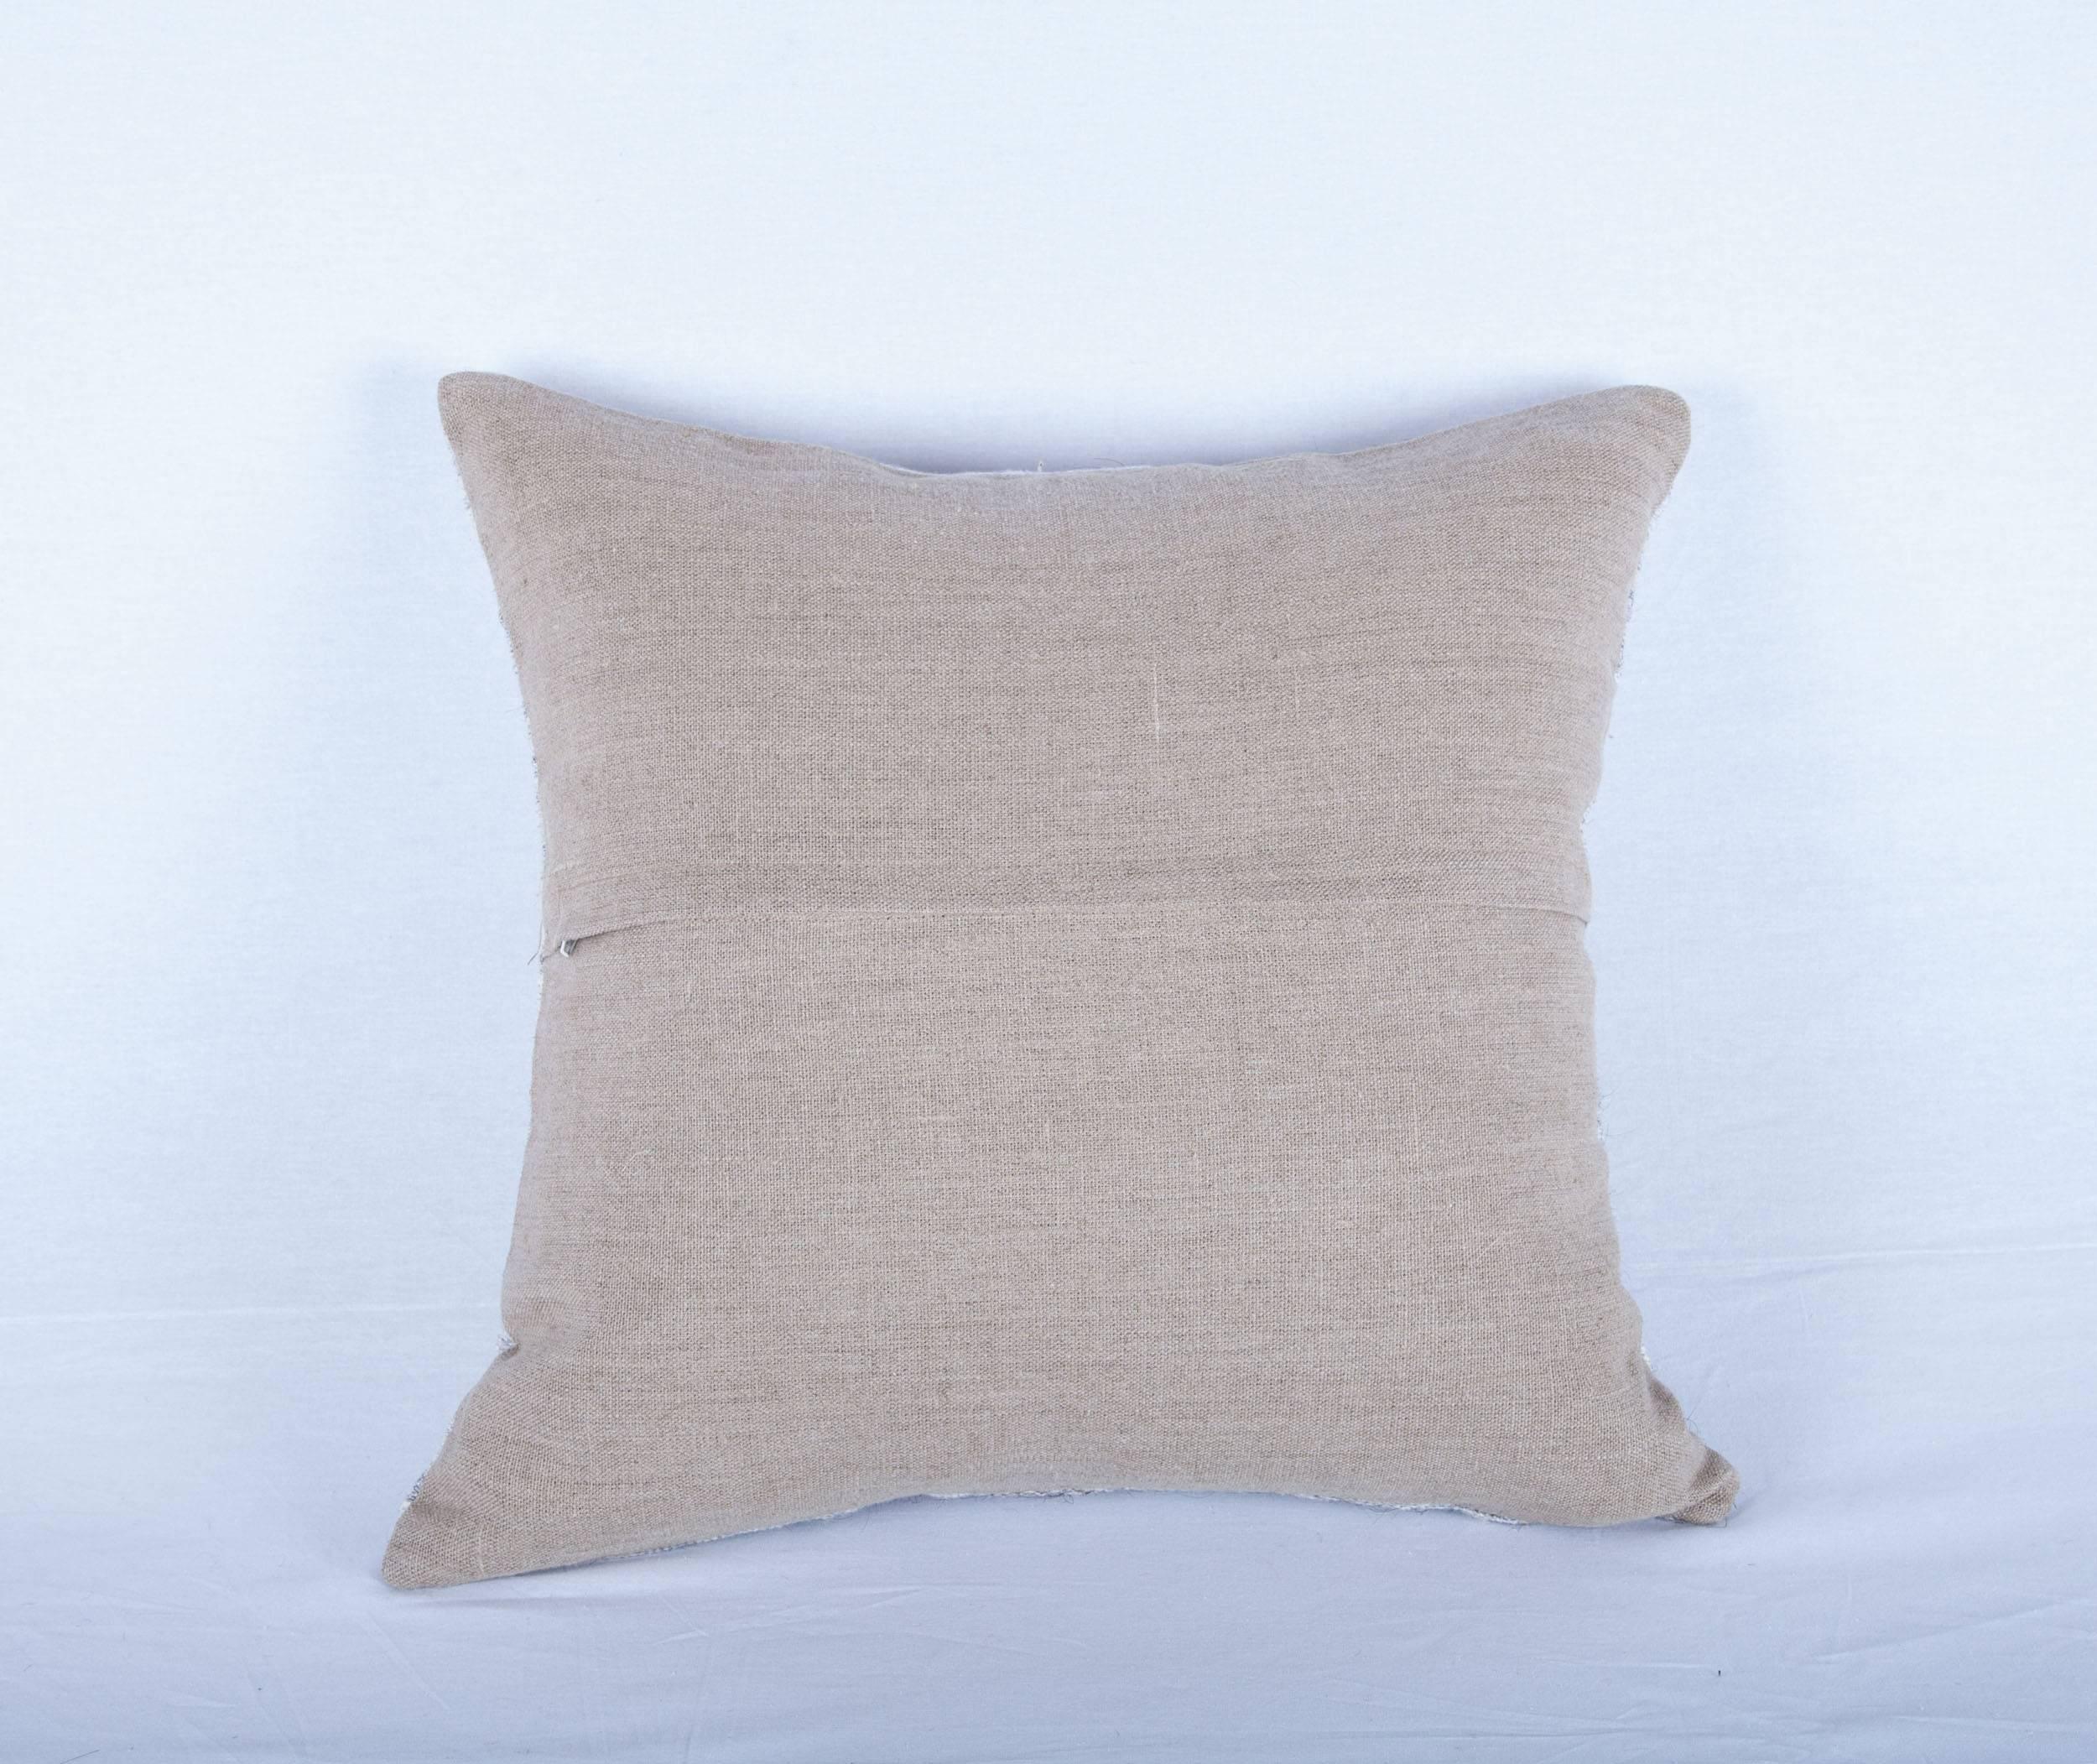 Cotton Pillow with a New Design on a Vintage Anatolian Nomadic Kilim, by Seref Ozen